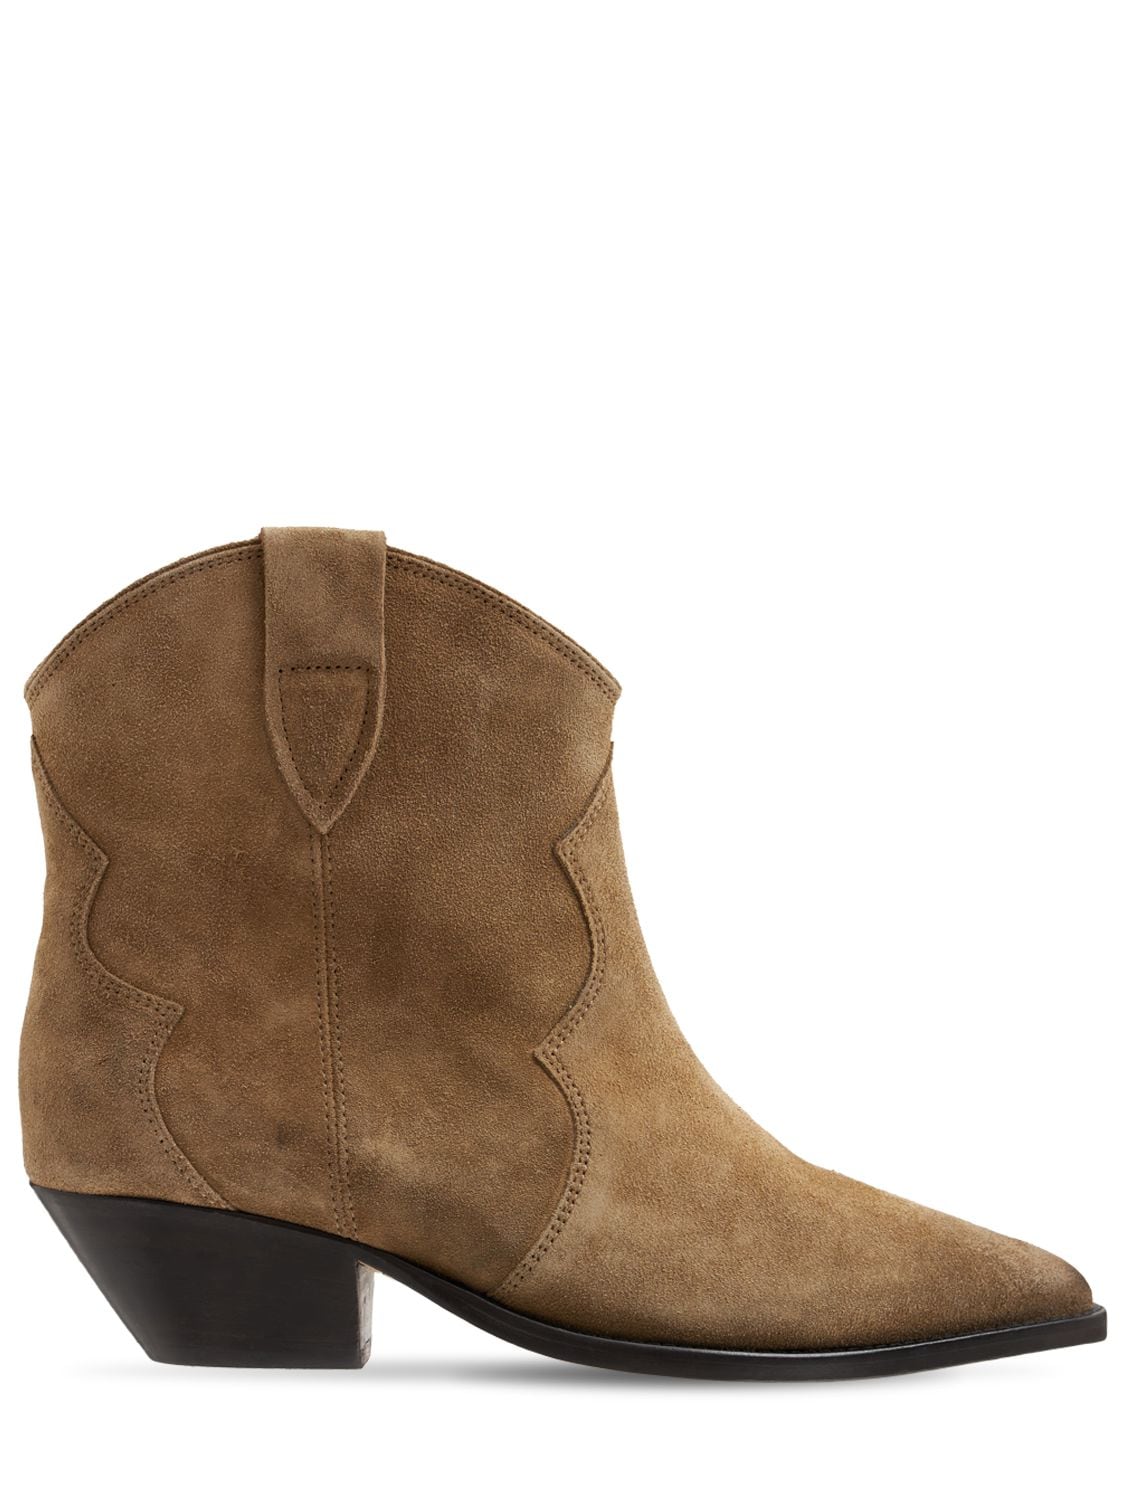 Fritid At sige sandheden teenagere Isabel Marant Dewina Distressed Suede Ankle Boots In Beige | ModeSens